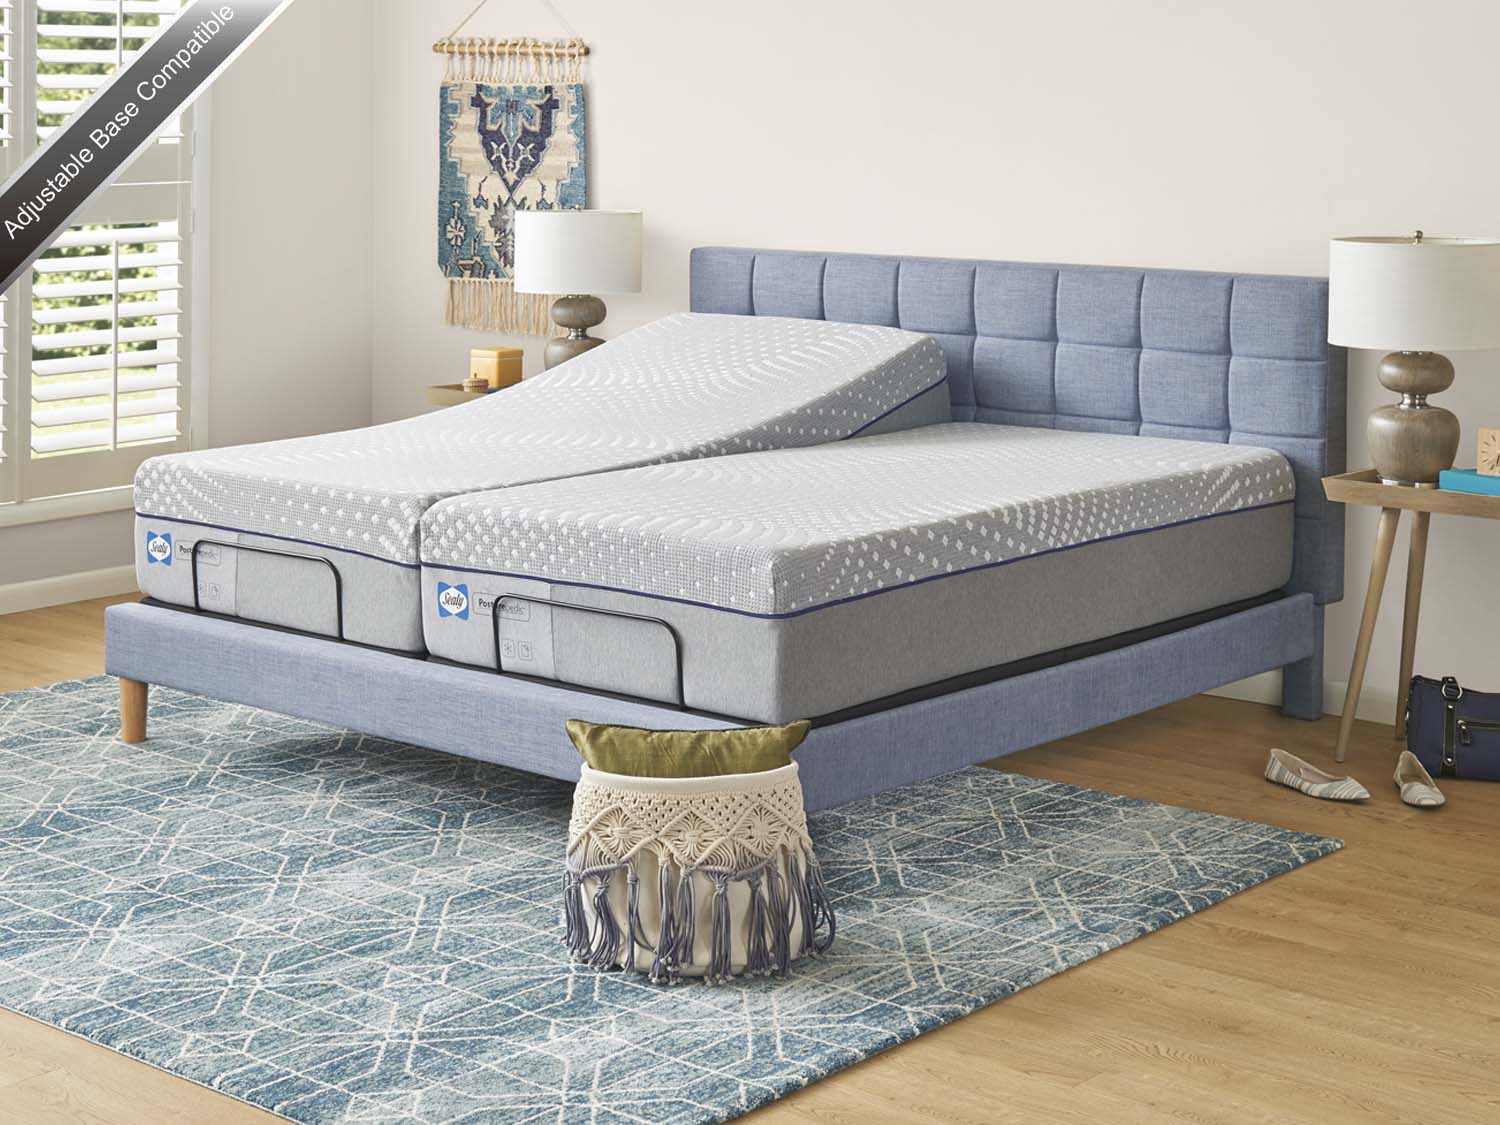 Barbo's Furniture of Cape Cod, Sealy, Posturepedic, Hybrid, Chablis, Soft, Mattress, Mattresses, Set, Queen, King, Twin, Full, X-long, extra, long